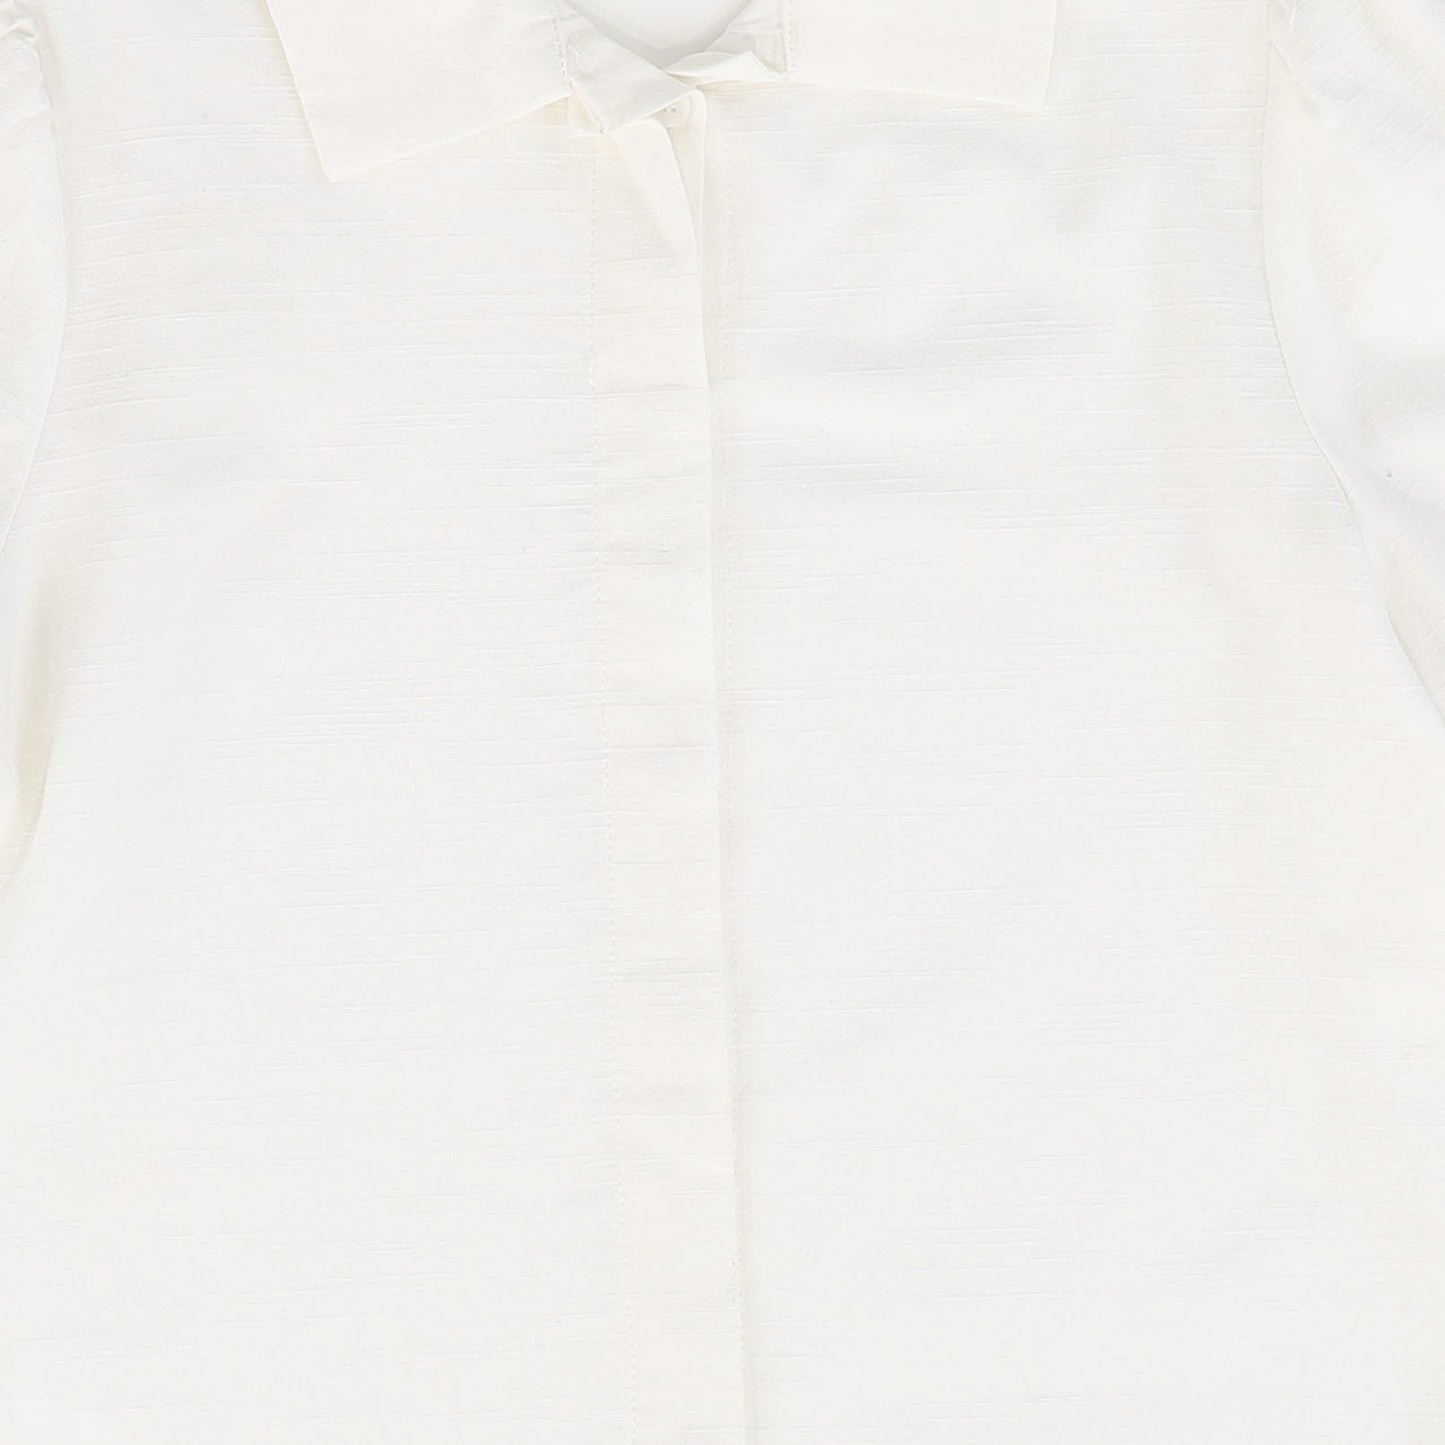 BACE COLLECTION WHITE PUFF SLEEVE COLLARD BLOUSE [FINAL SALE]